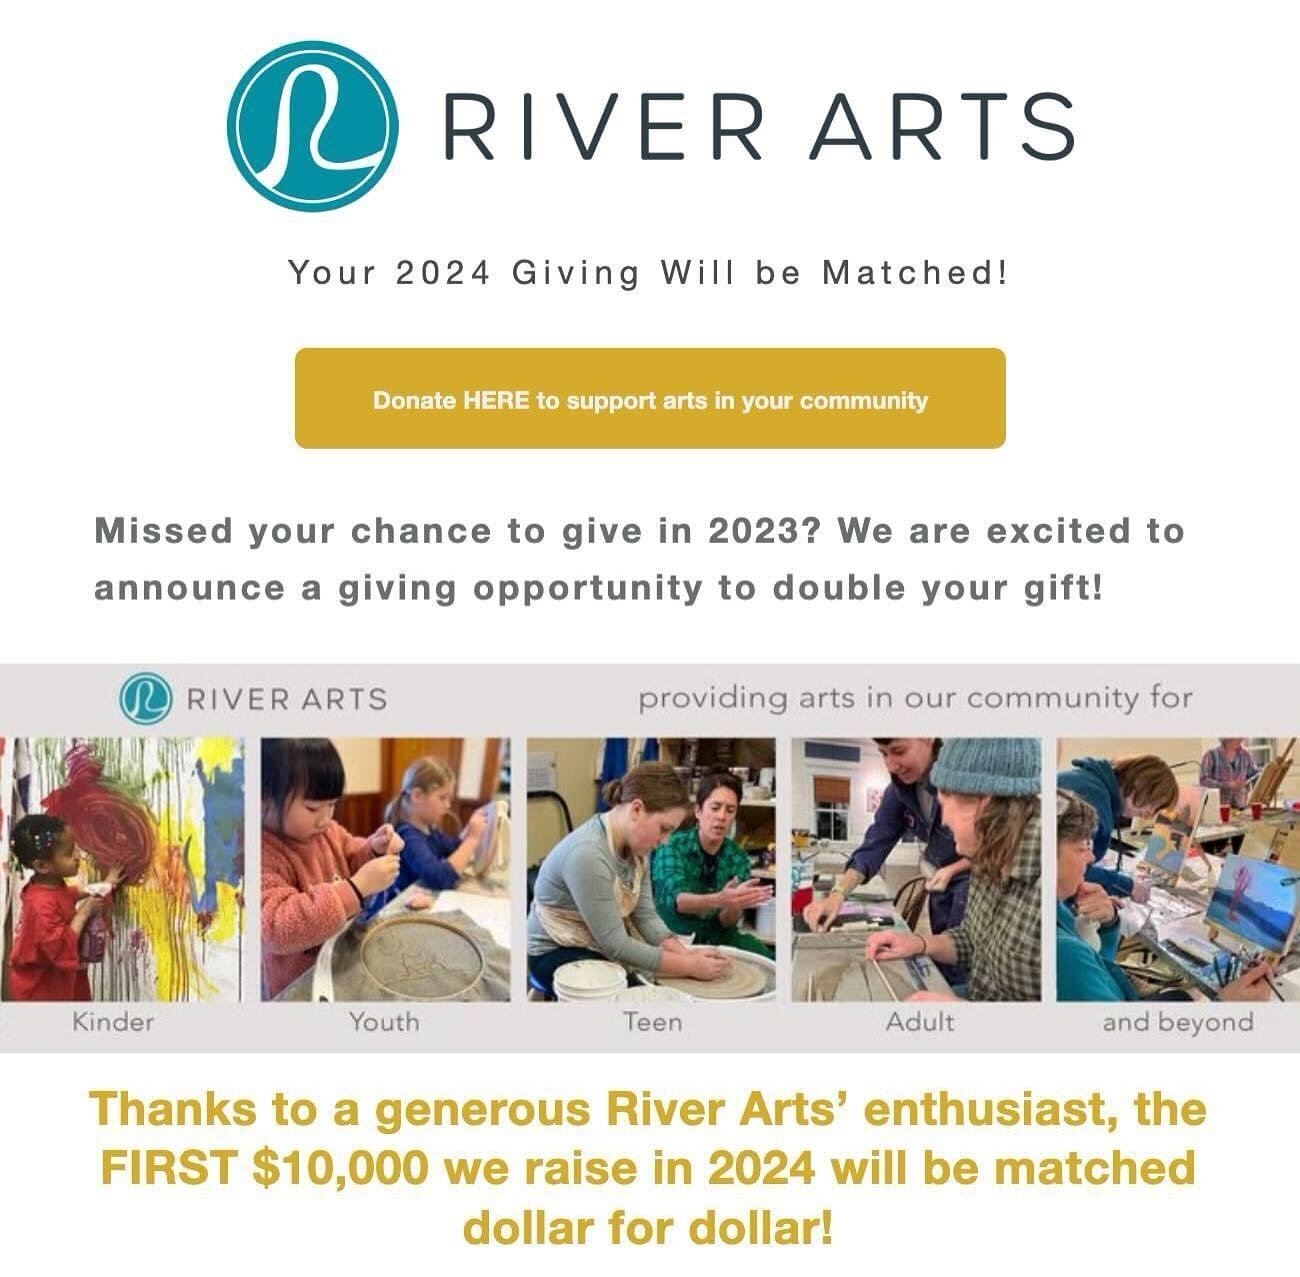 We could not offer free programming and tuition assistance without YOUR support. Thank you for helping us reach this $10,000 dollar-for-dollar match goal! 🥰
Donate link in our profile. 💌
#riverarts #riverartsvt #yourcommunityartcenter #art #artcent